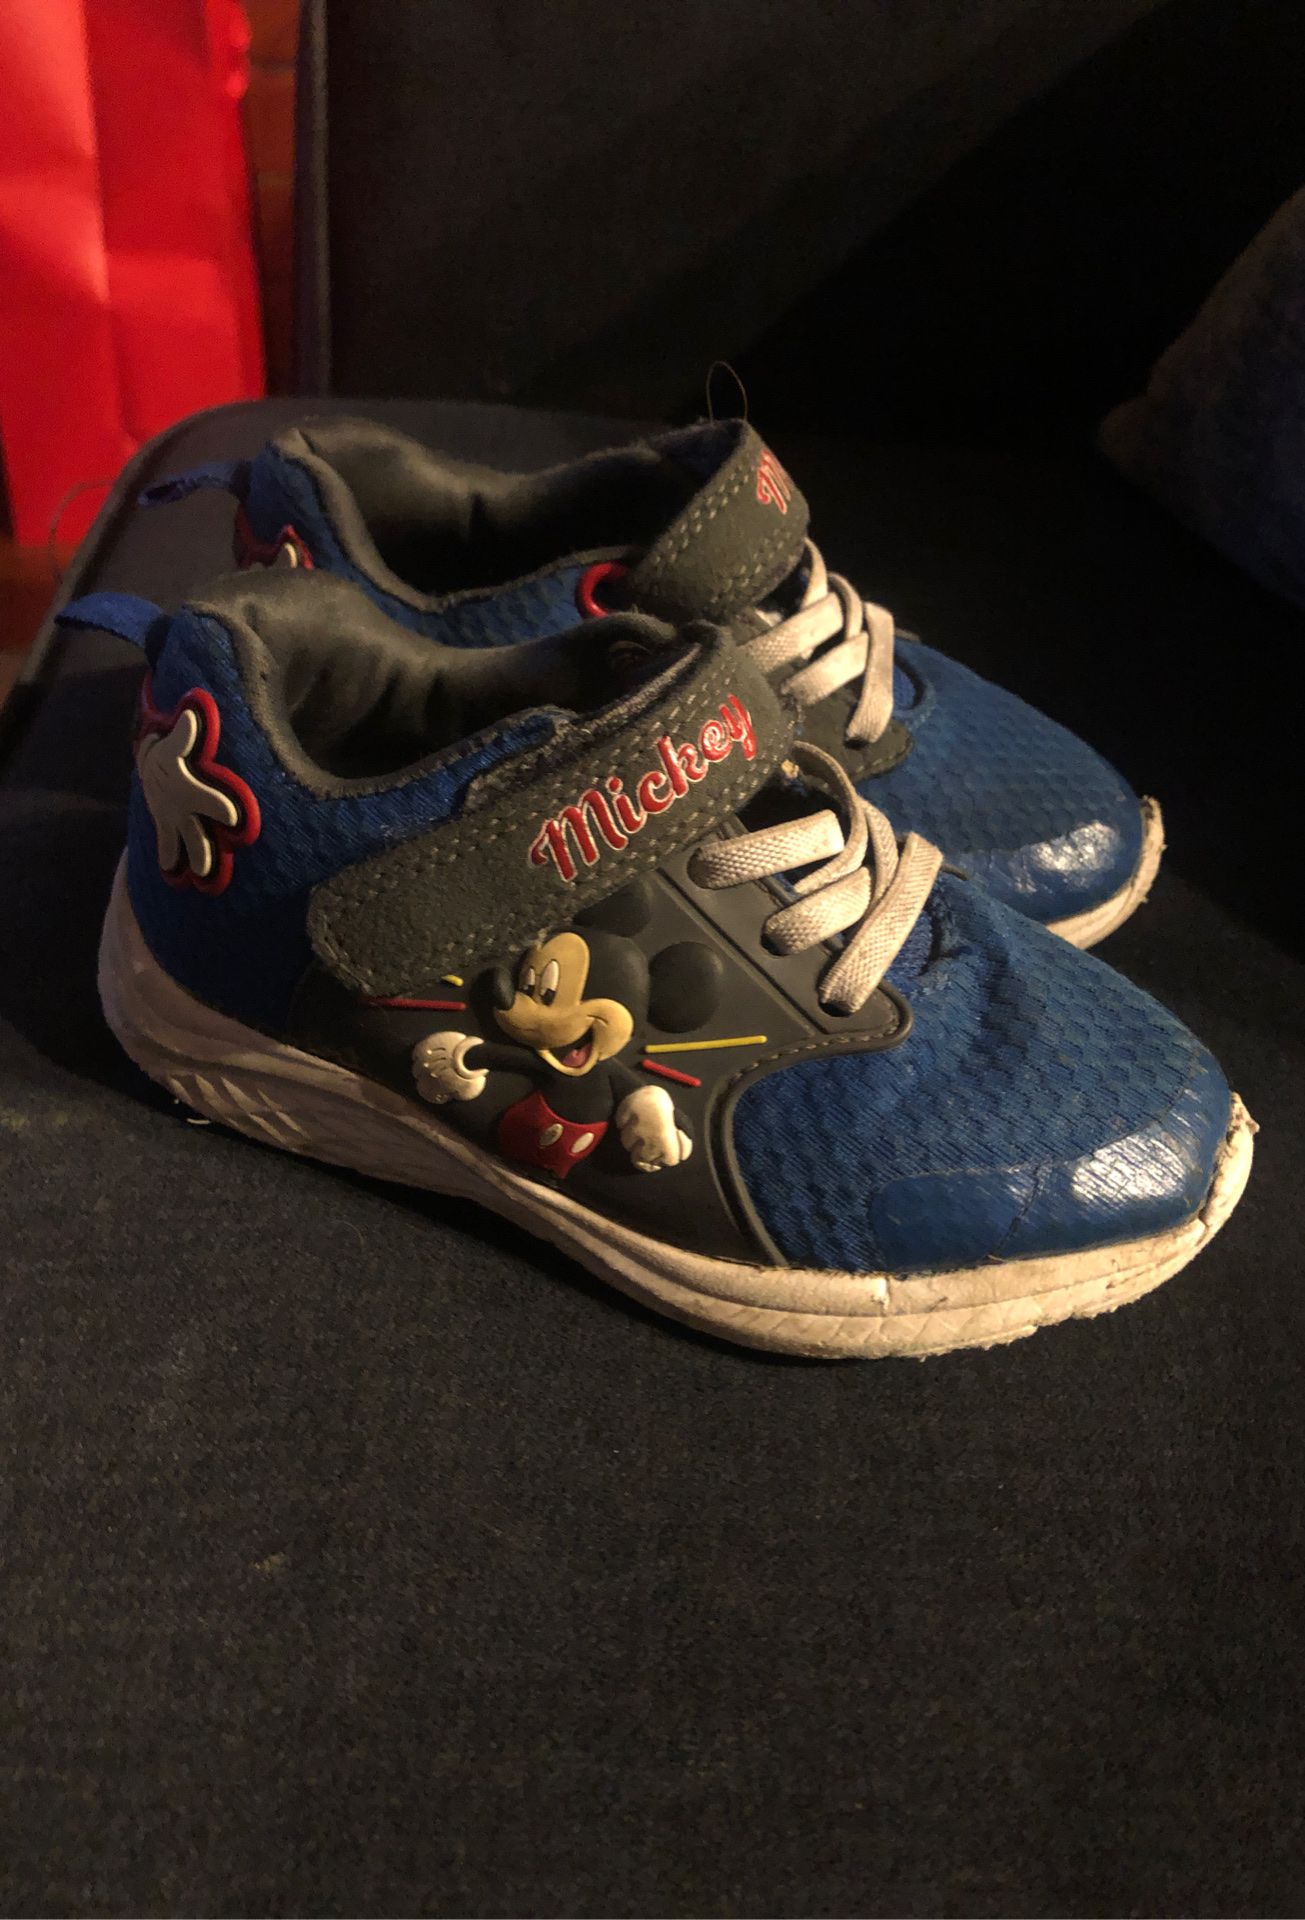 Free Mickey Mouse shoes size 10